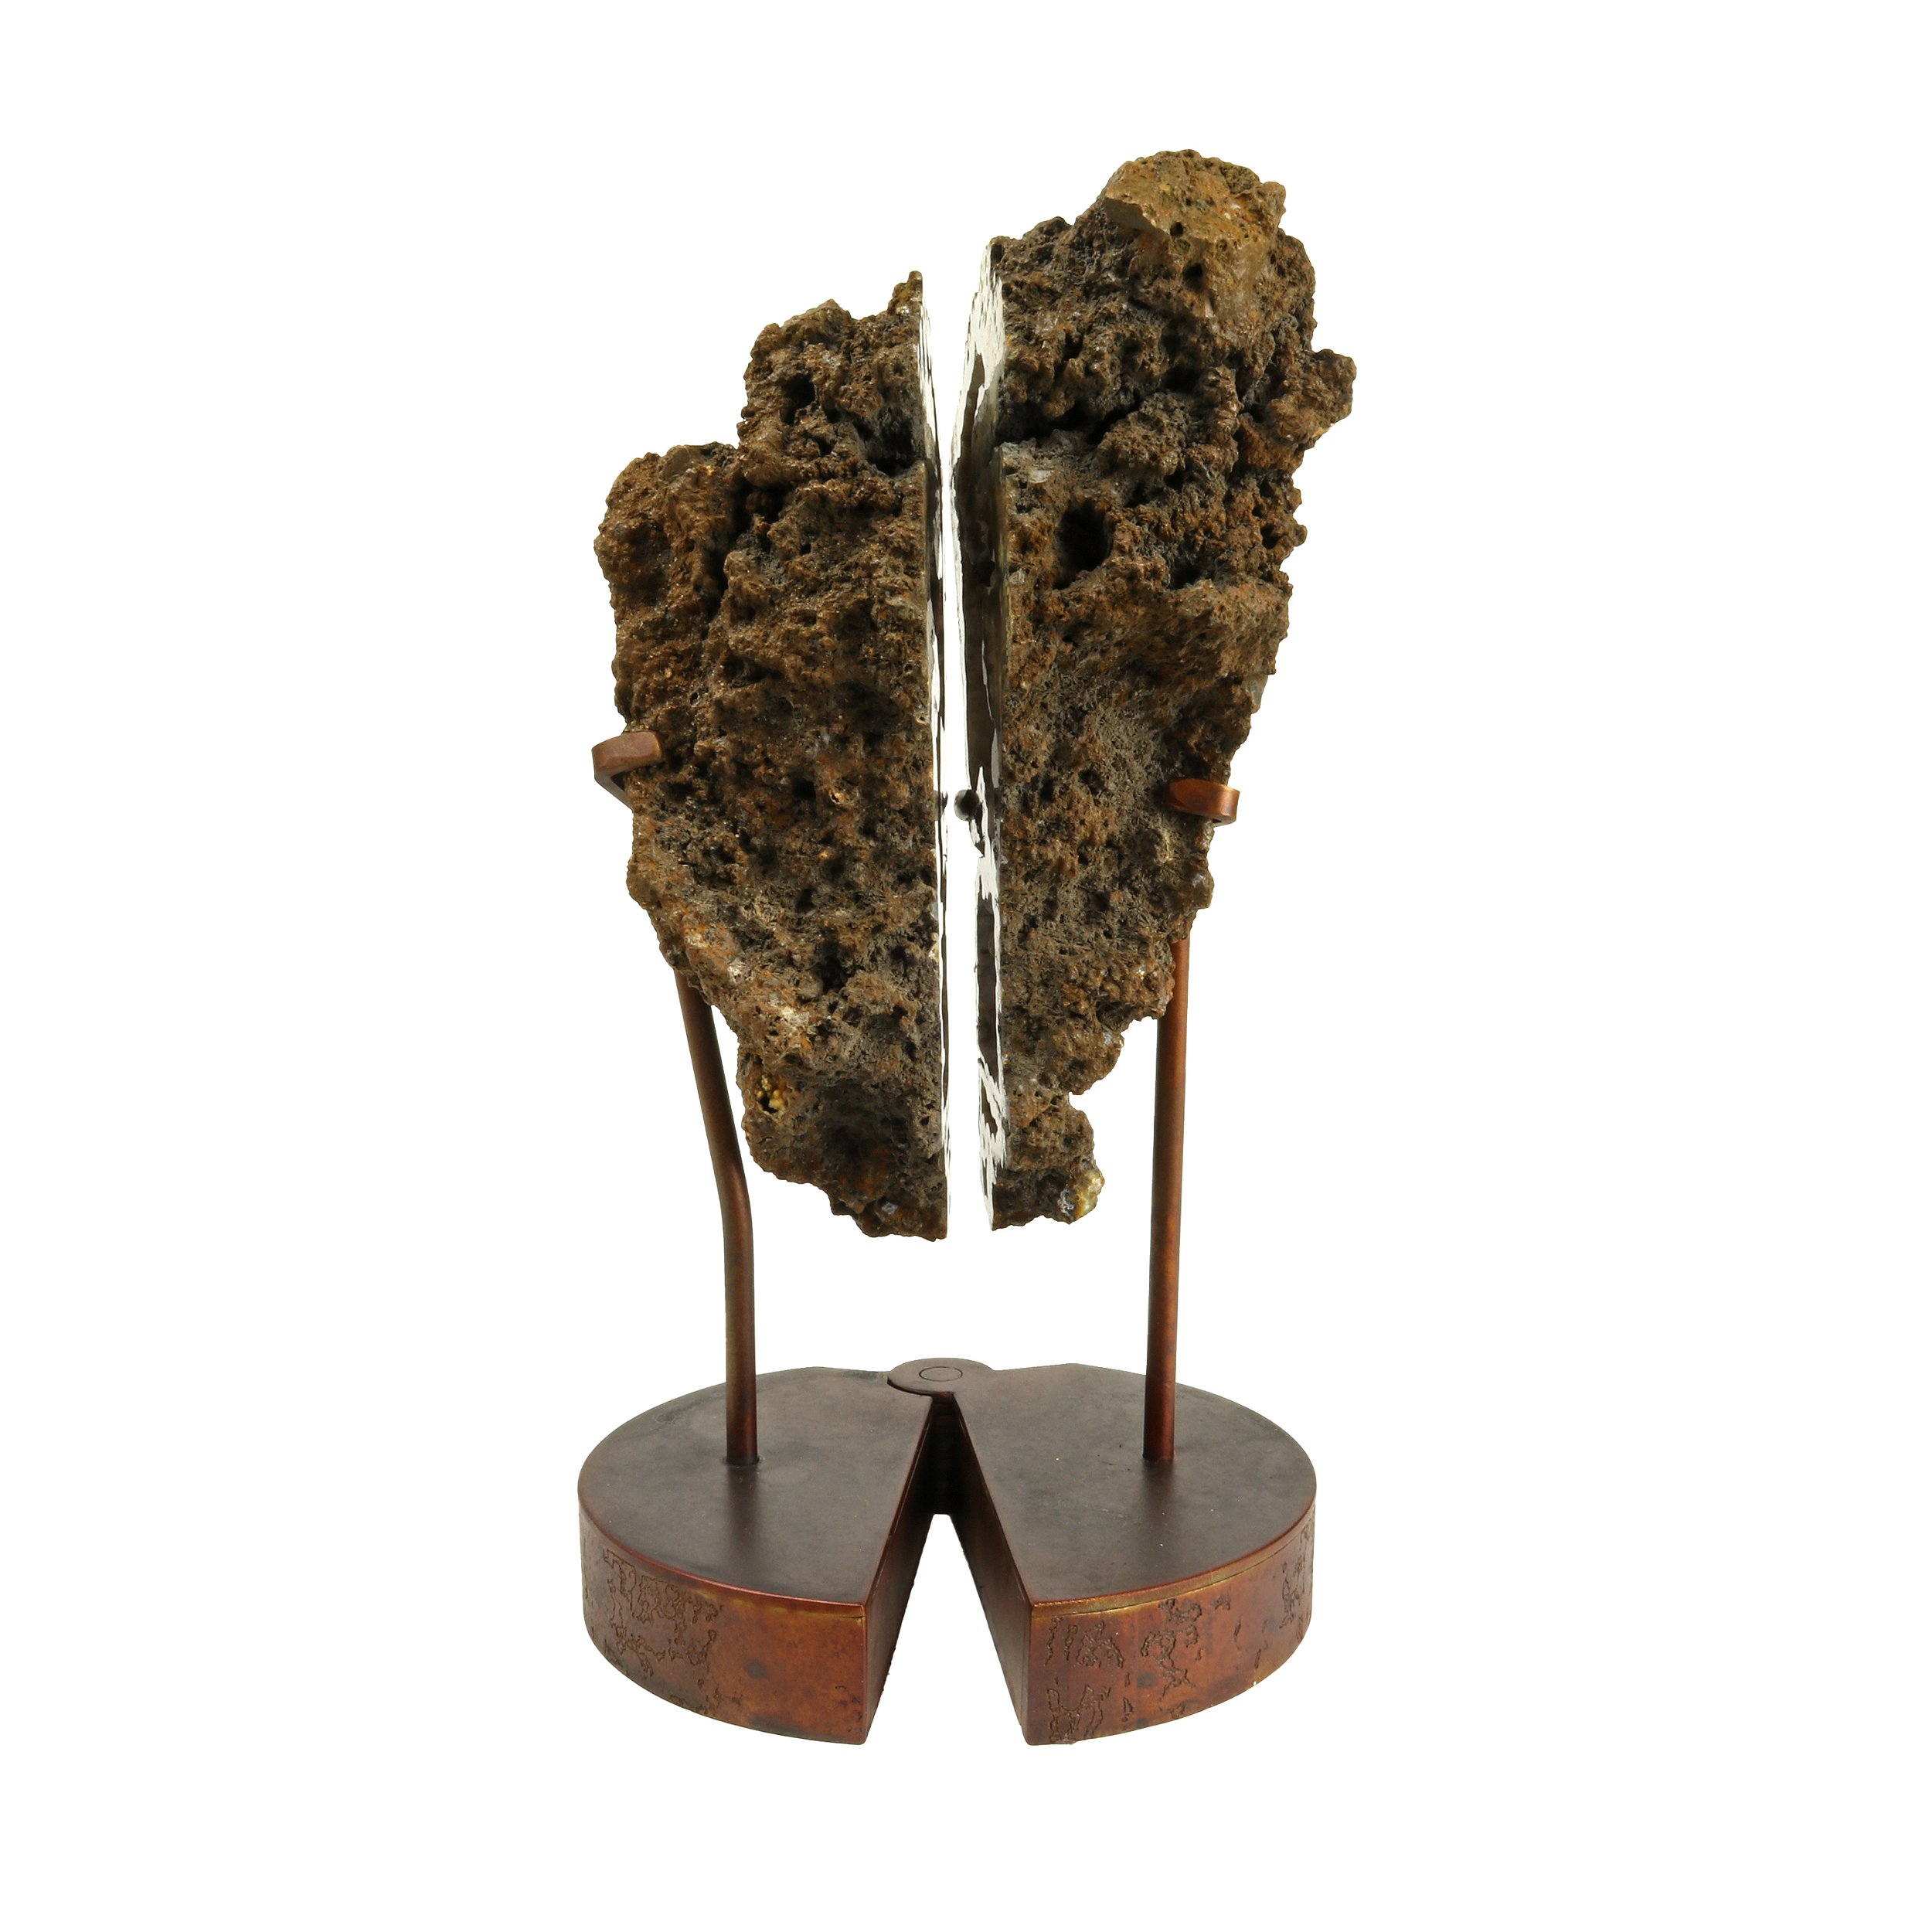 Fossilized Coral Head Pair In Custom Pivot Stand - Chocolate Exterior With White Interior Plume Agate And Druze Pockets At Bottom